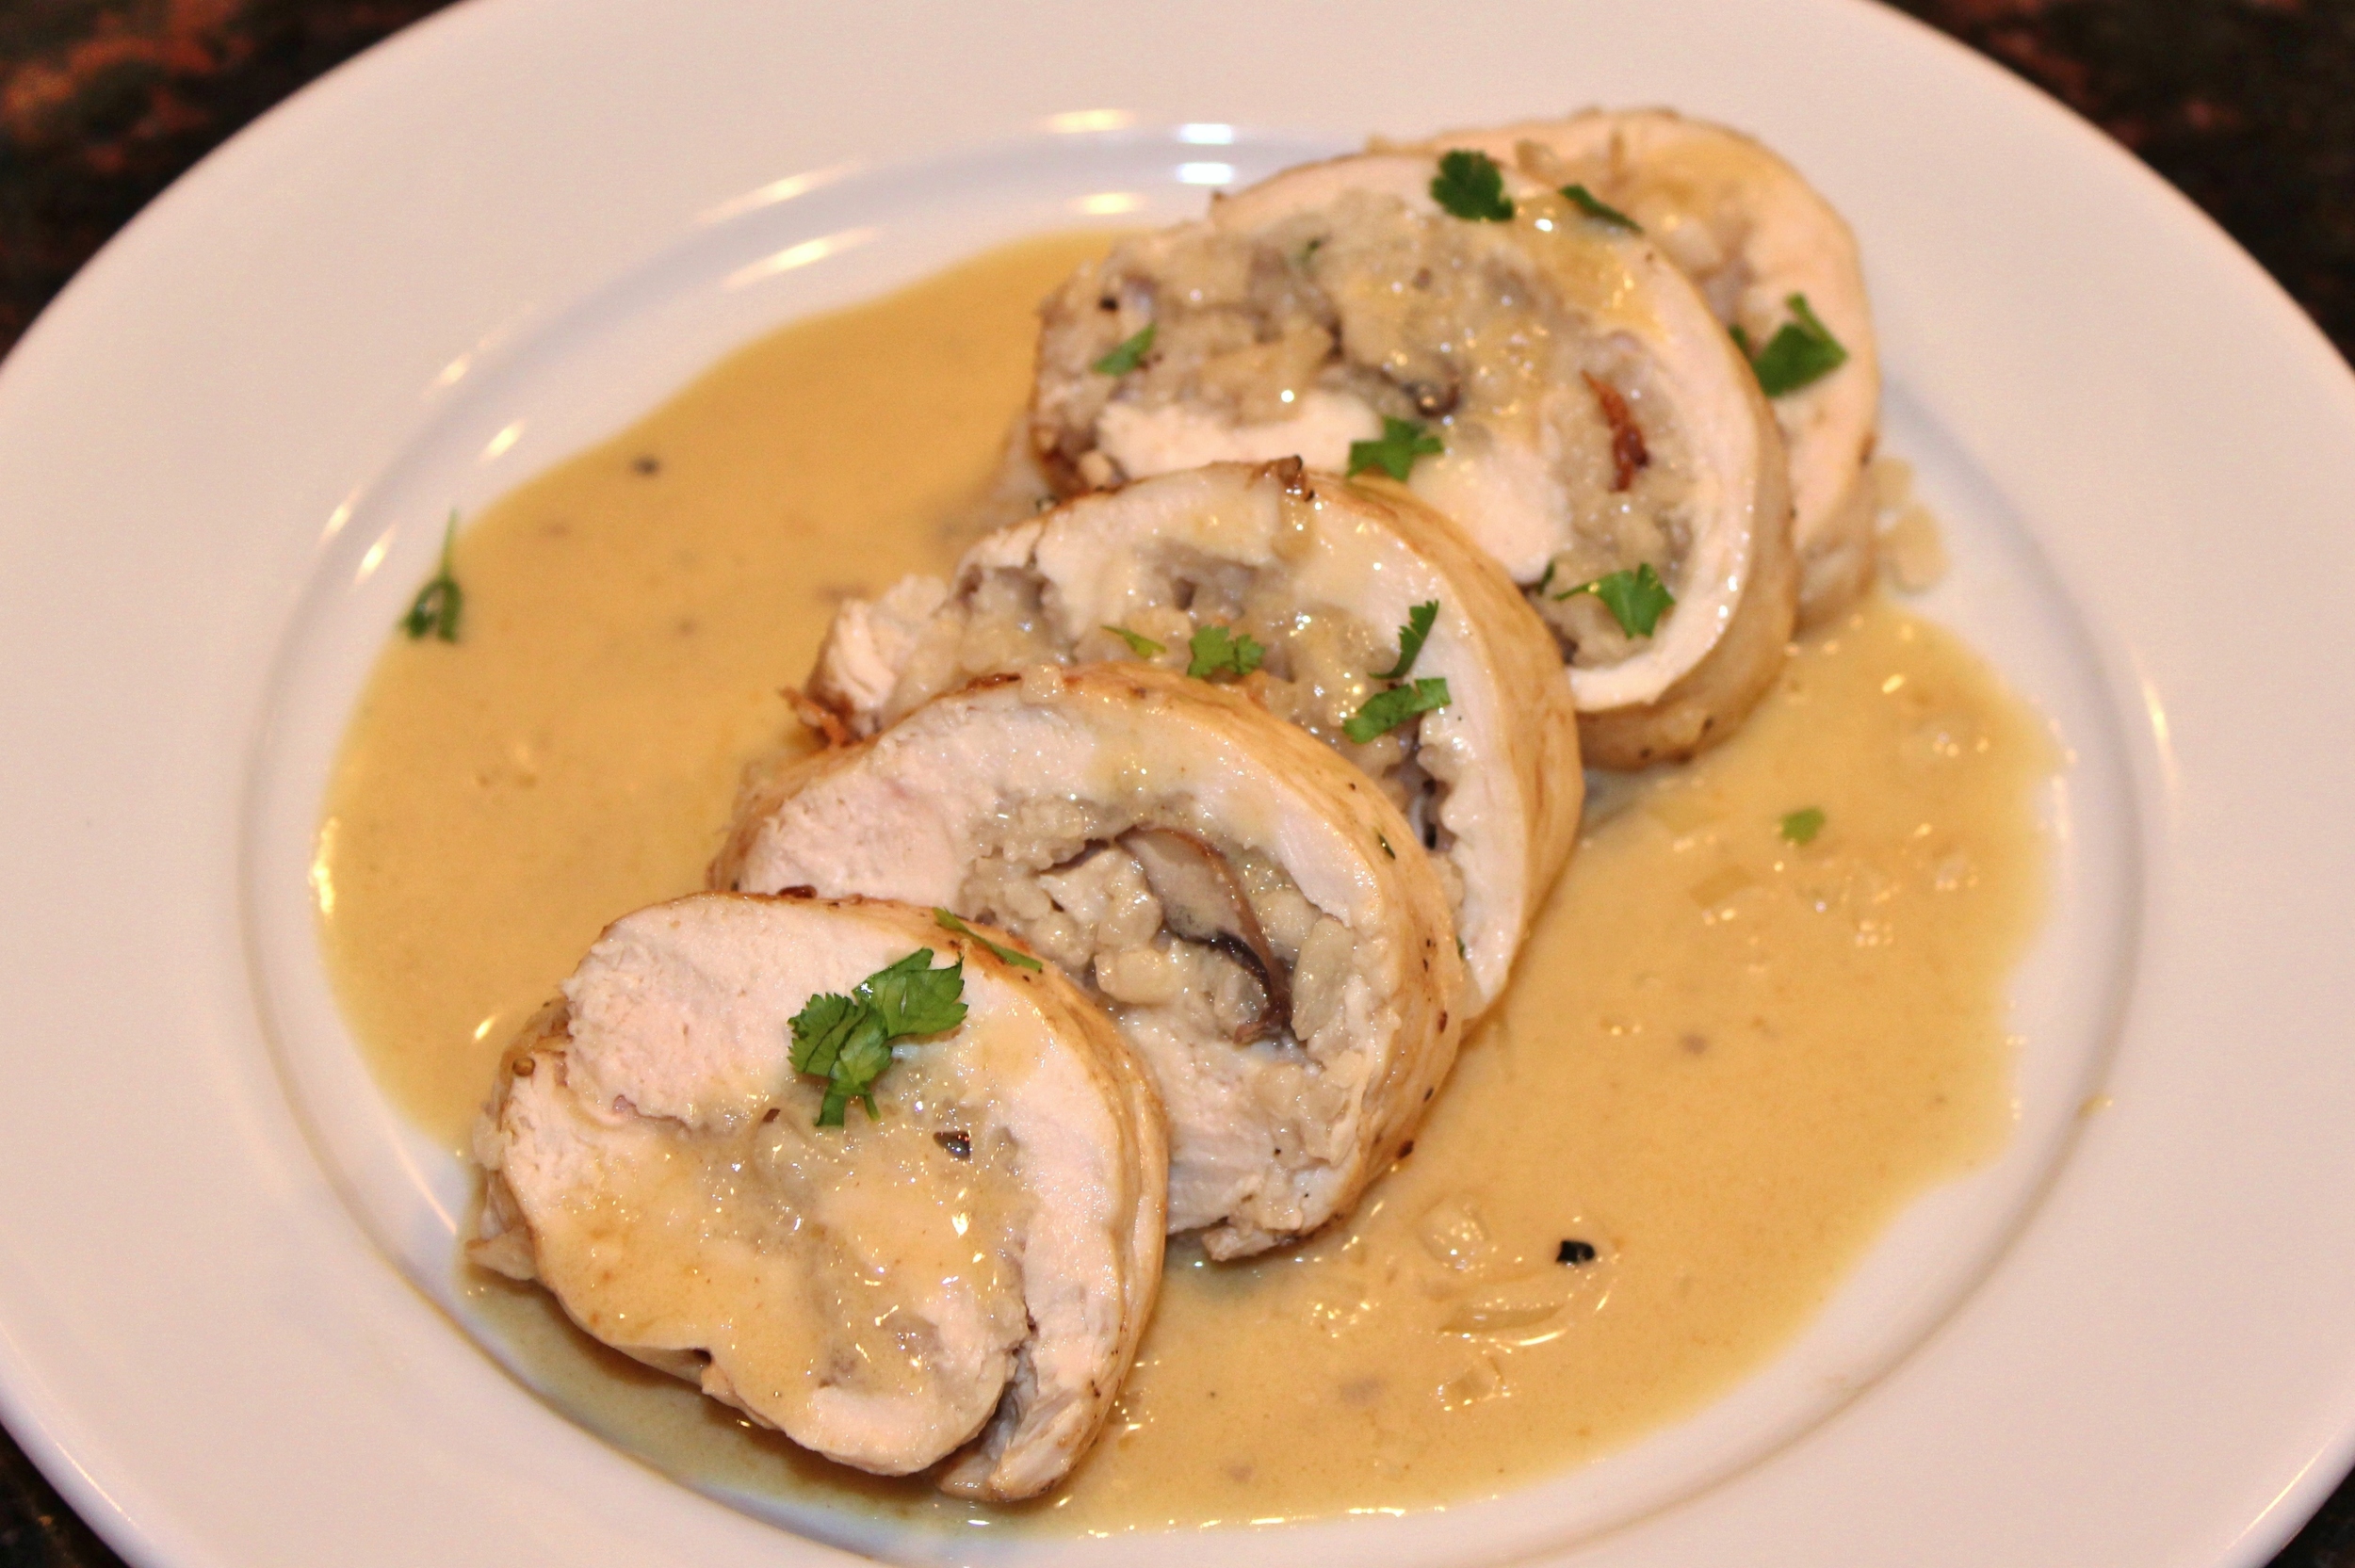 Chicken roulades stuffed with mushroom risotto